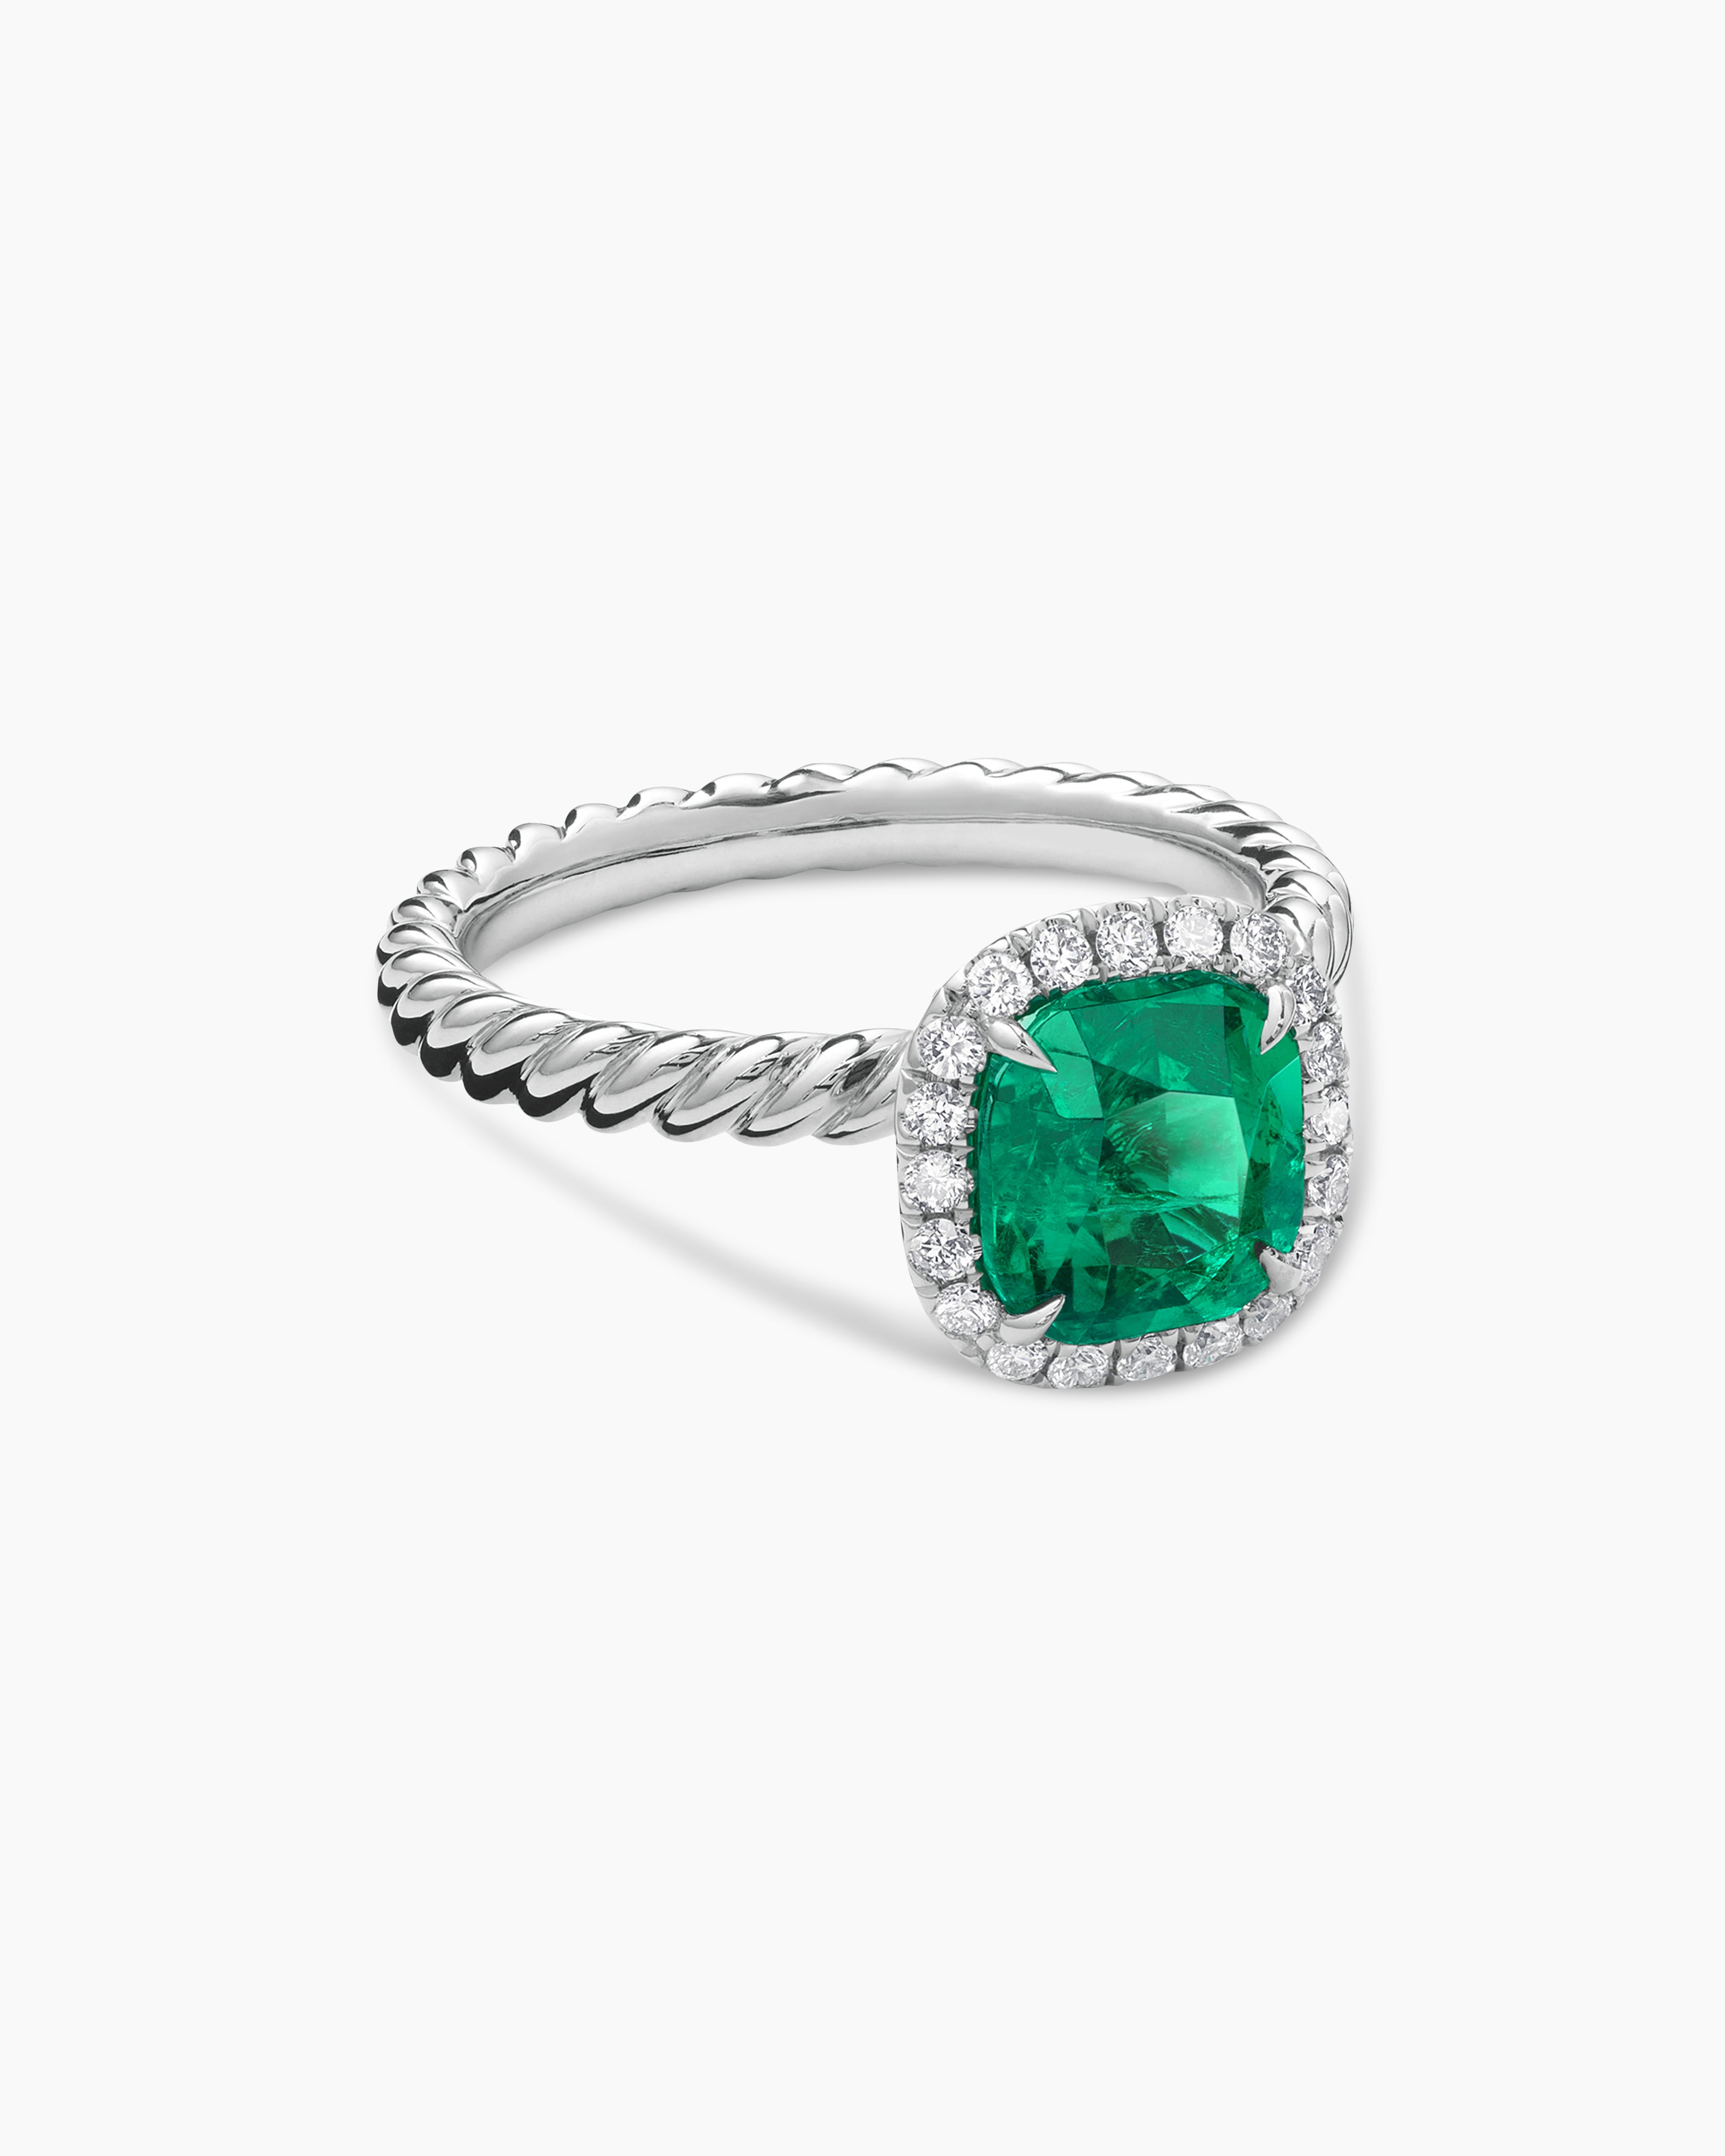 Buy Lab Grown Emerald Engagement Rings Online at Best Price